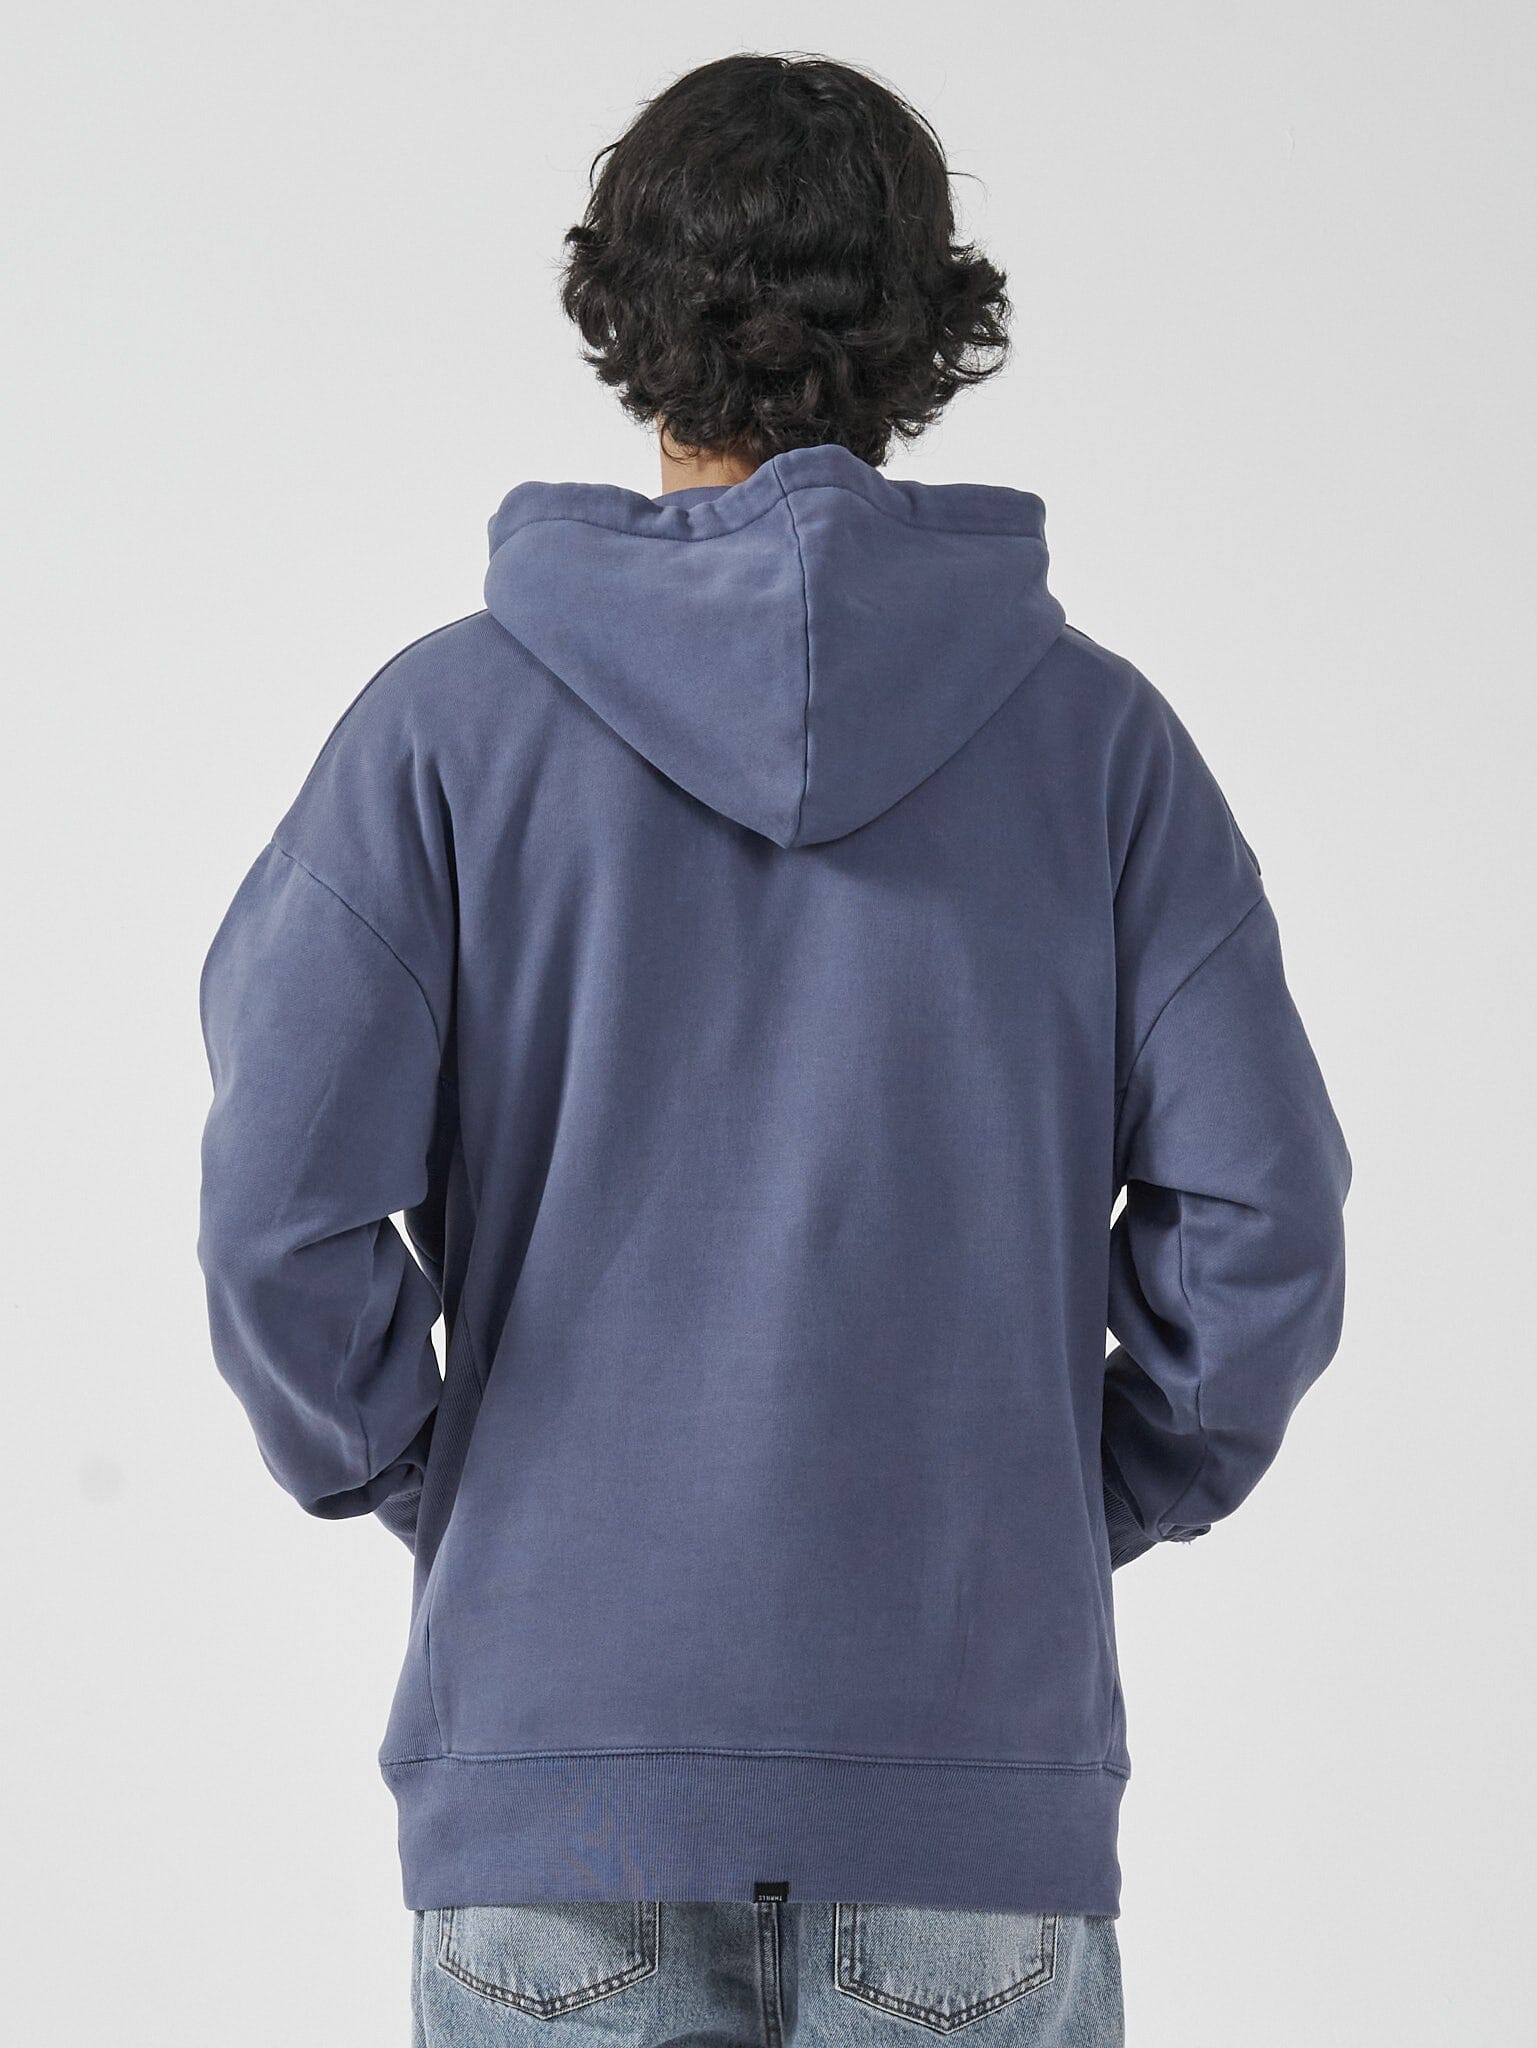 Magical Vibration Slouch Pull On Hood - Marlin – THRILLS CO